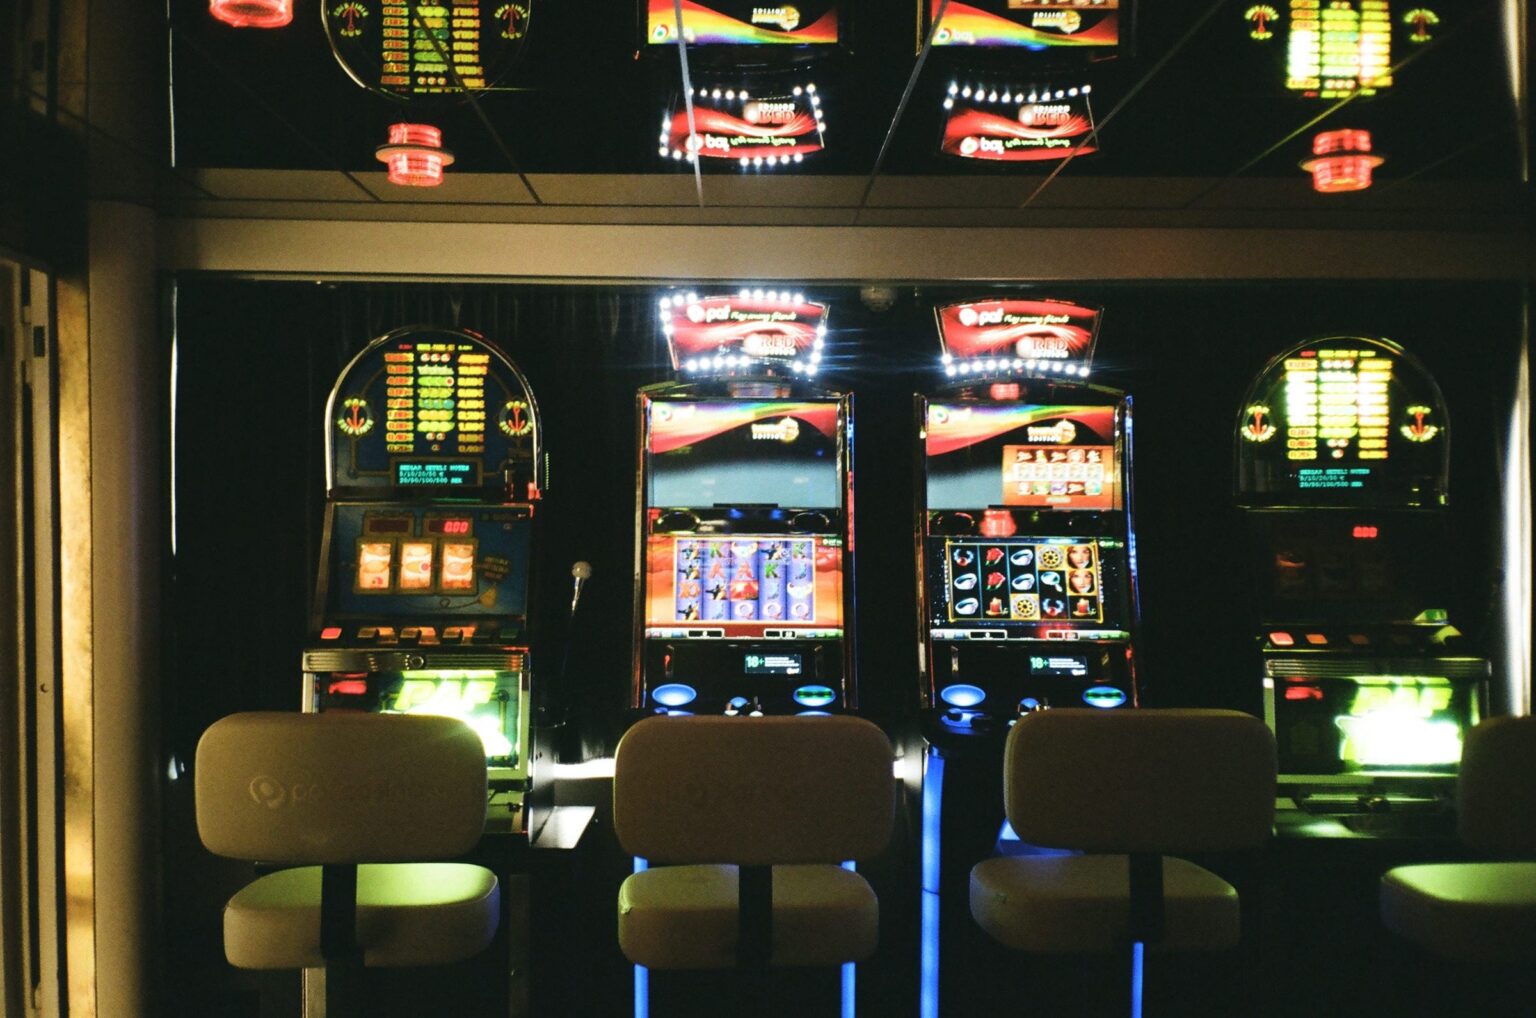 Do you enjoy the casino? Get ready to learn more about gambling in Ireland and the reasons for the popularity of online slots.